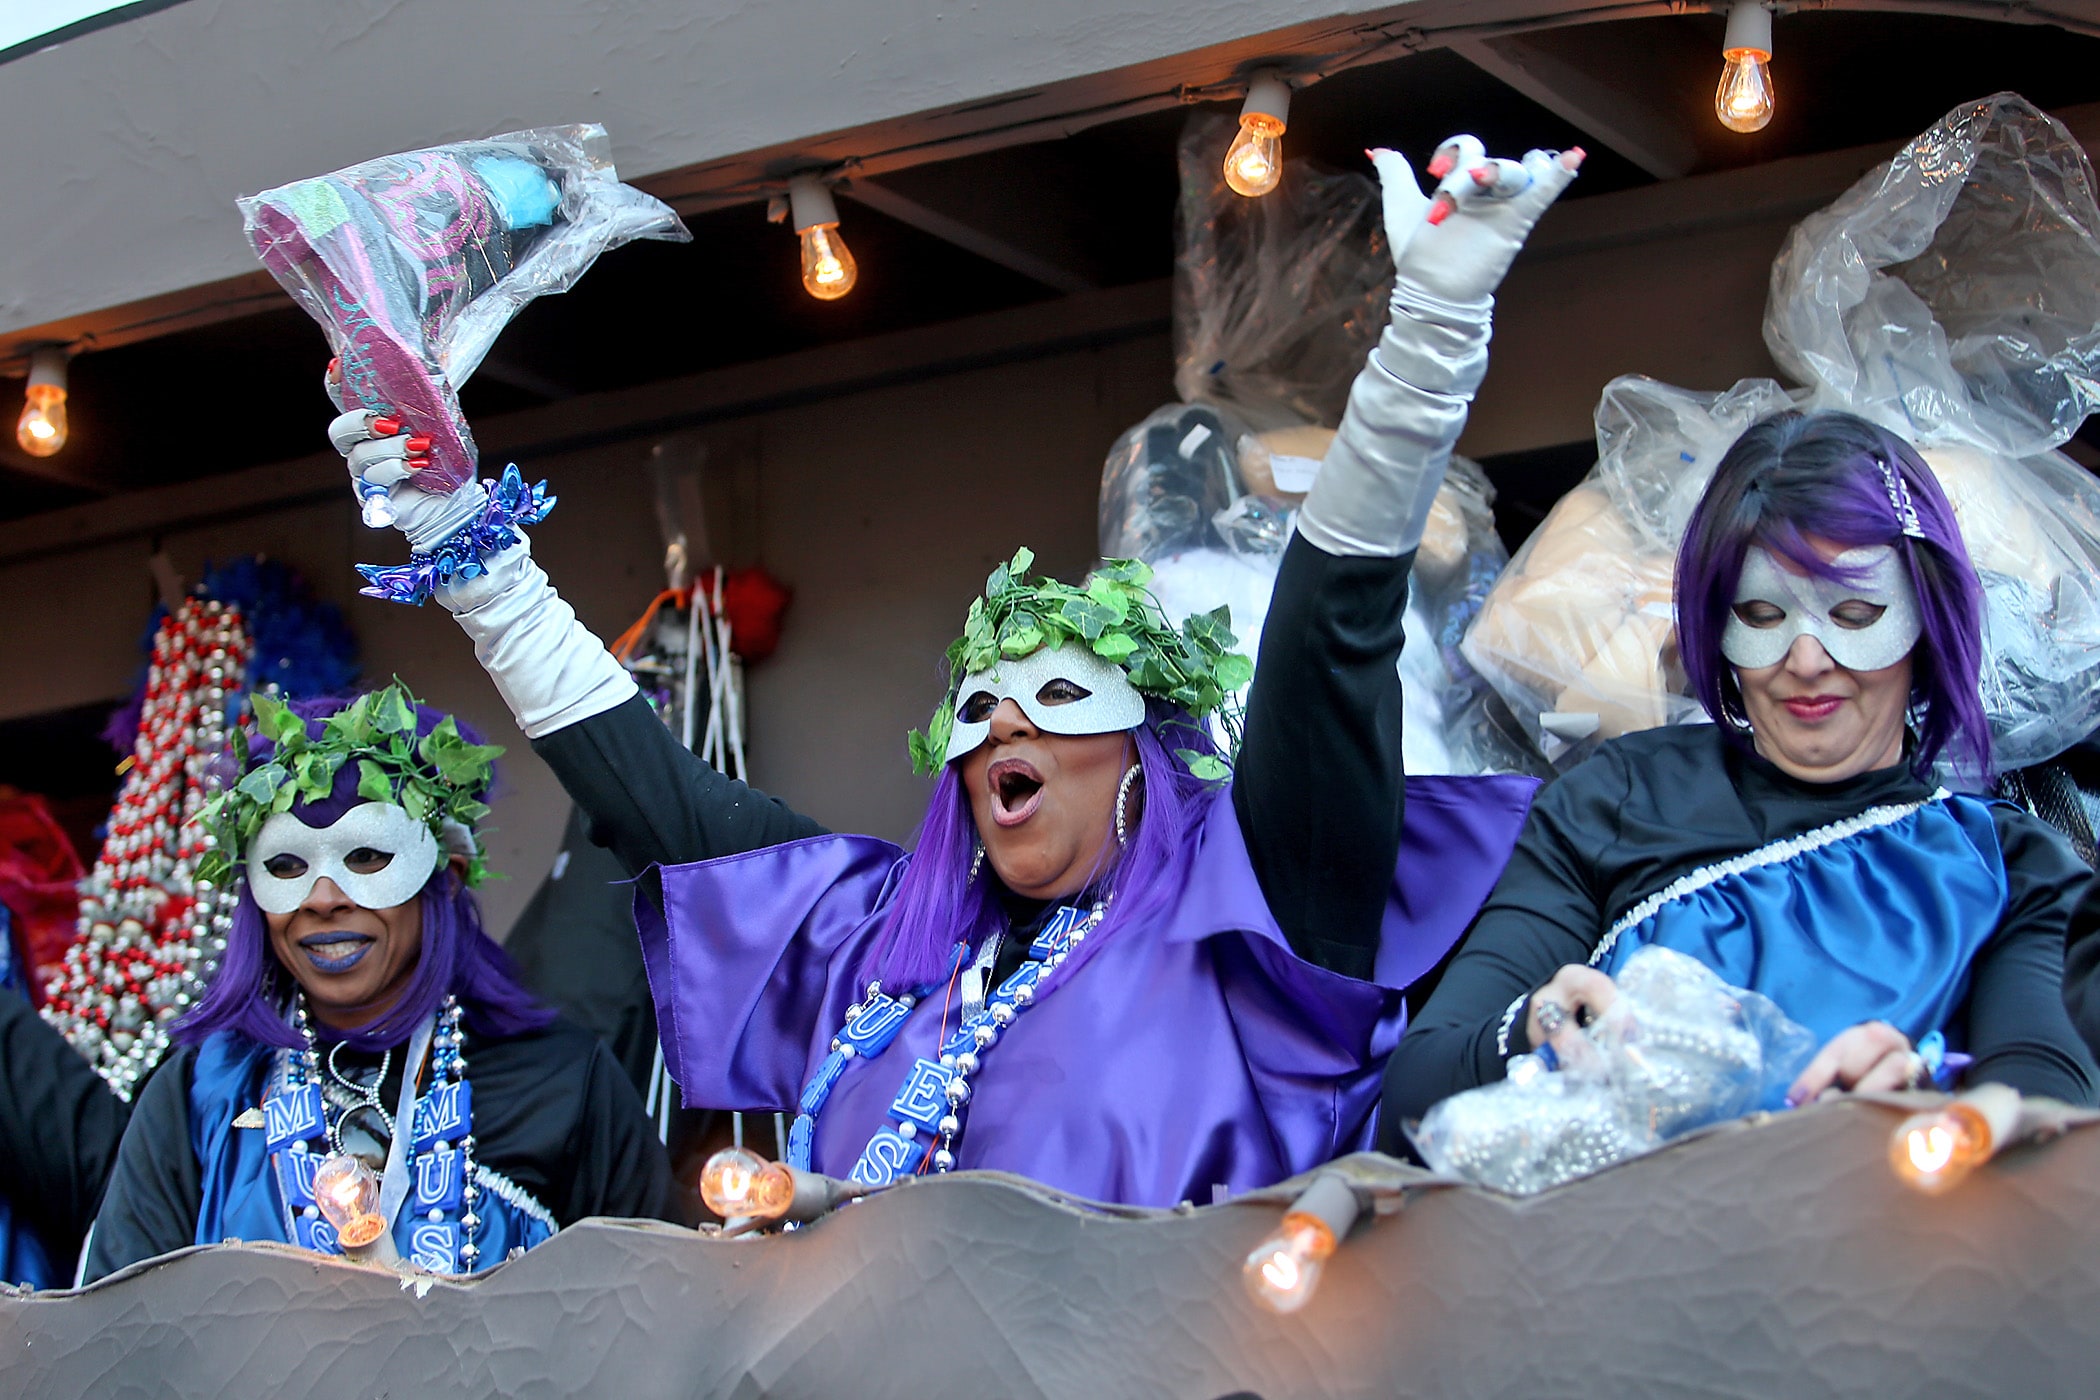 A rider offers up a shoe as the over 1100 women of the Krewe of Muses roll down the Uptown parade route with a 26-float parade with the theme “Nostradamuse Sees All” as they celebrate their 20th anniversary on Friday, February 21, 2020. (Photo by Michael DeMocker)